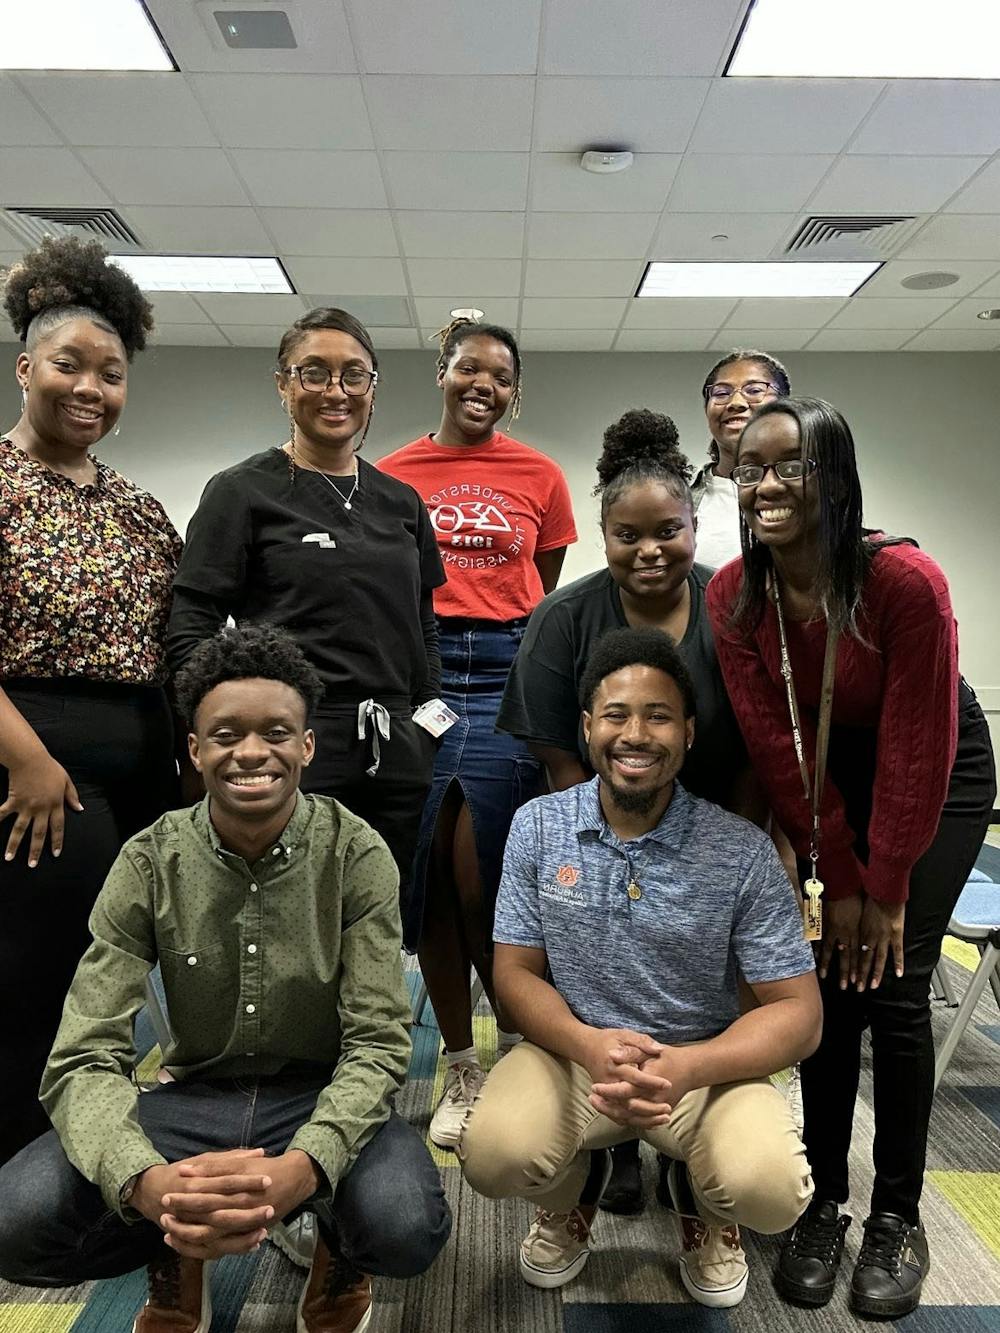 <p>Members of the Student Association of Black Veterinarians (SABV). Pictured in front, vice-president Gavin Southern (left) and president, Rodney Hobbs (right). Photo courtesy of SABV.</p>